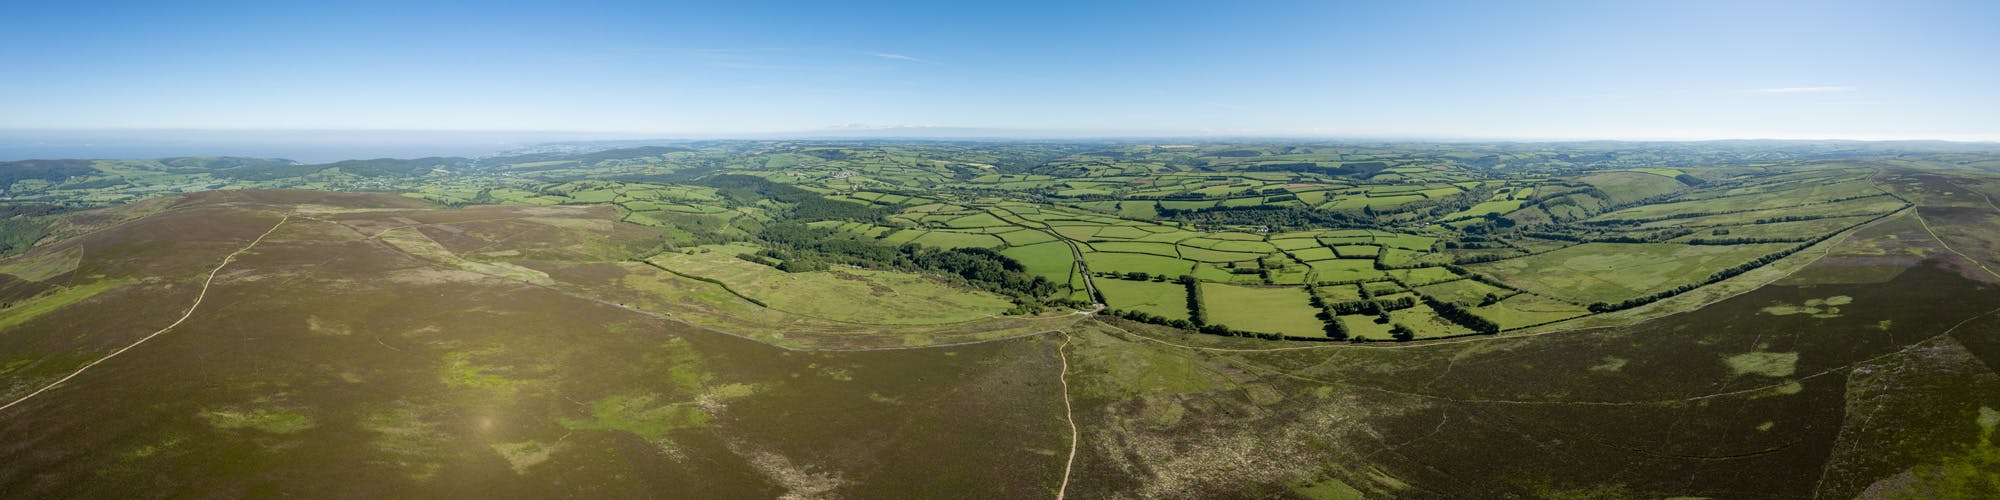 Steadway Farm CL from Dunkery Beacon, Exmoor, Somerset